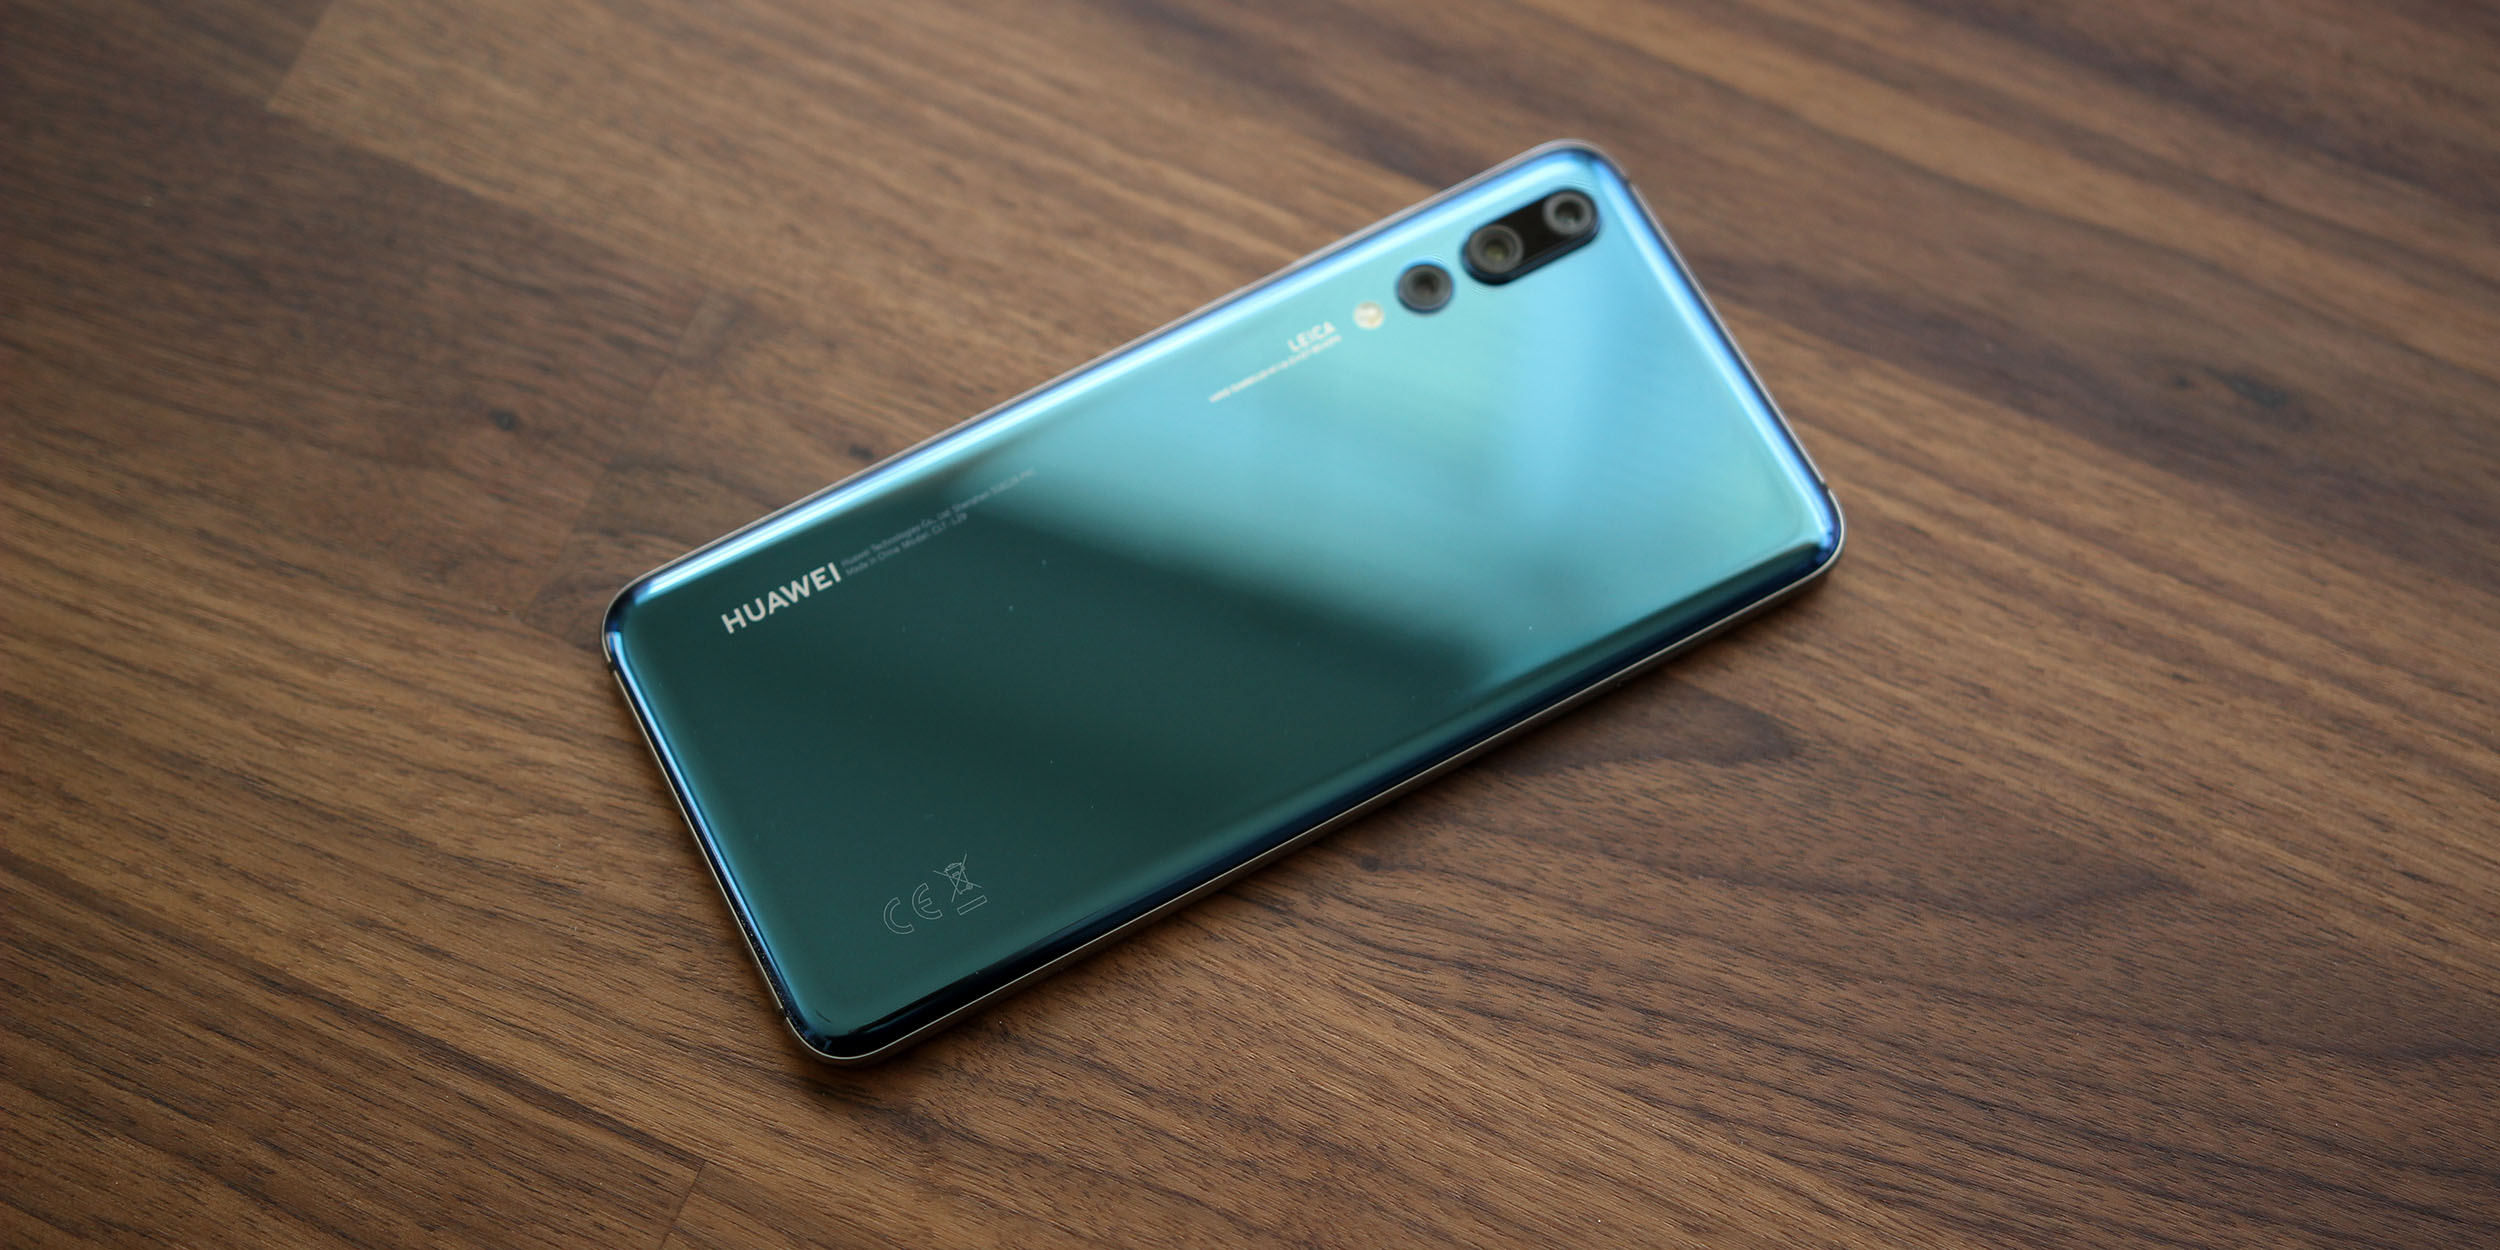 The Huawei P20 Pro and P20 join the Mate 10 Pro outside Huawei's security  update schedule -  News